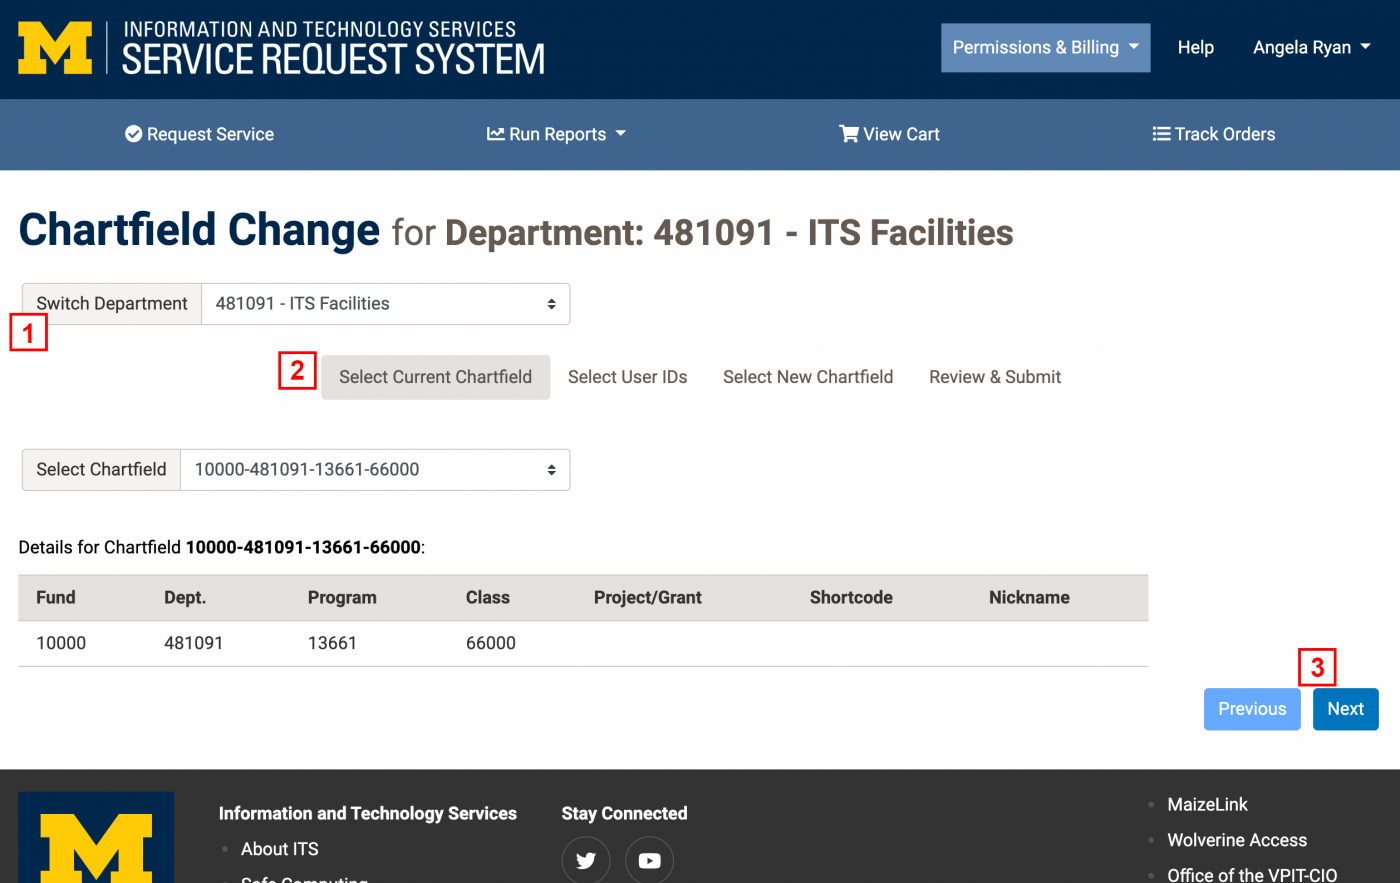 Screenshot with red numbers next to steps of the Select Current Chartfield page of the Chartfield Change Request